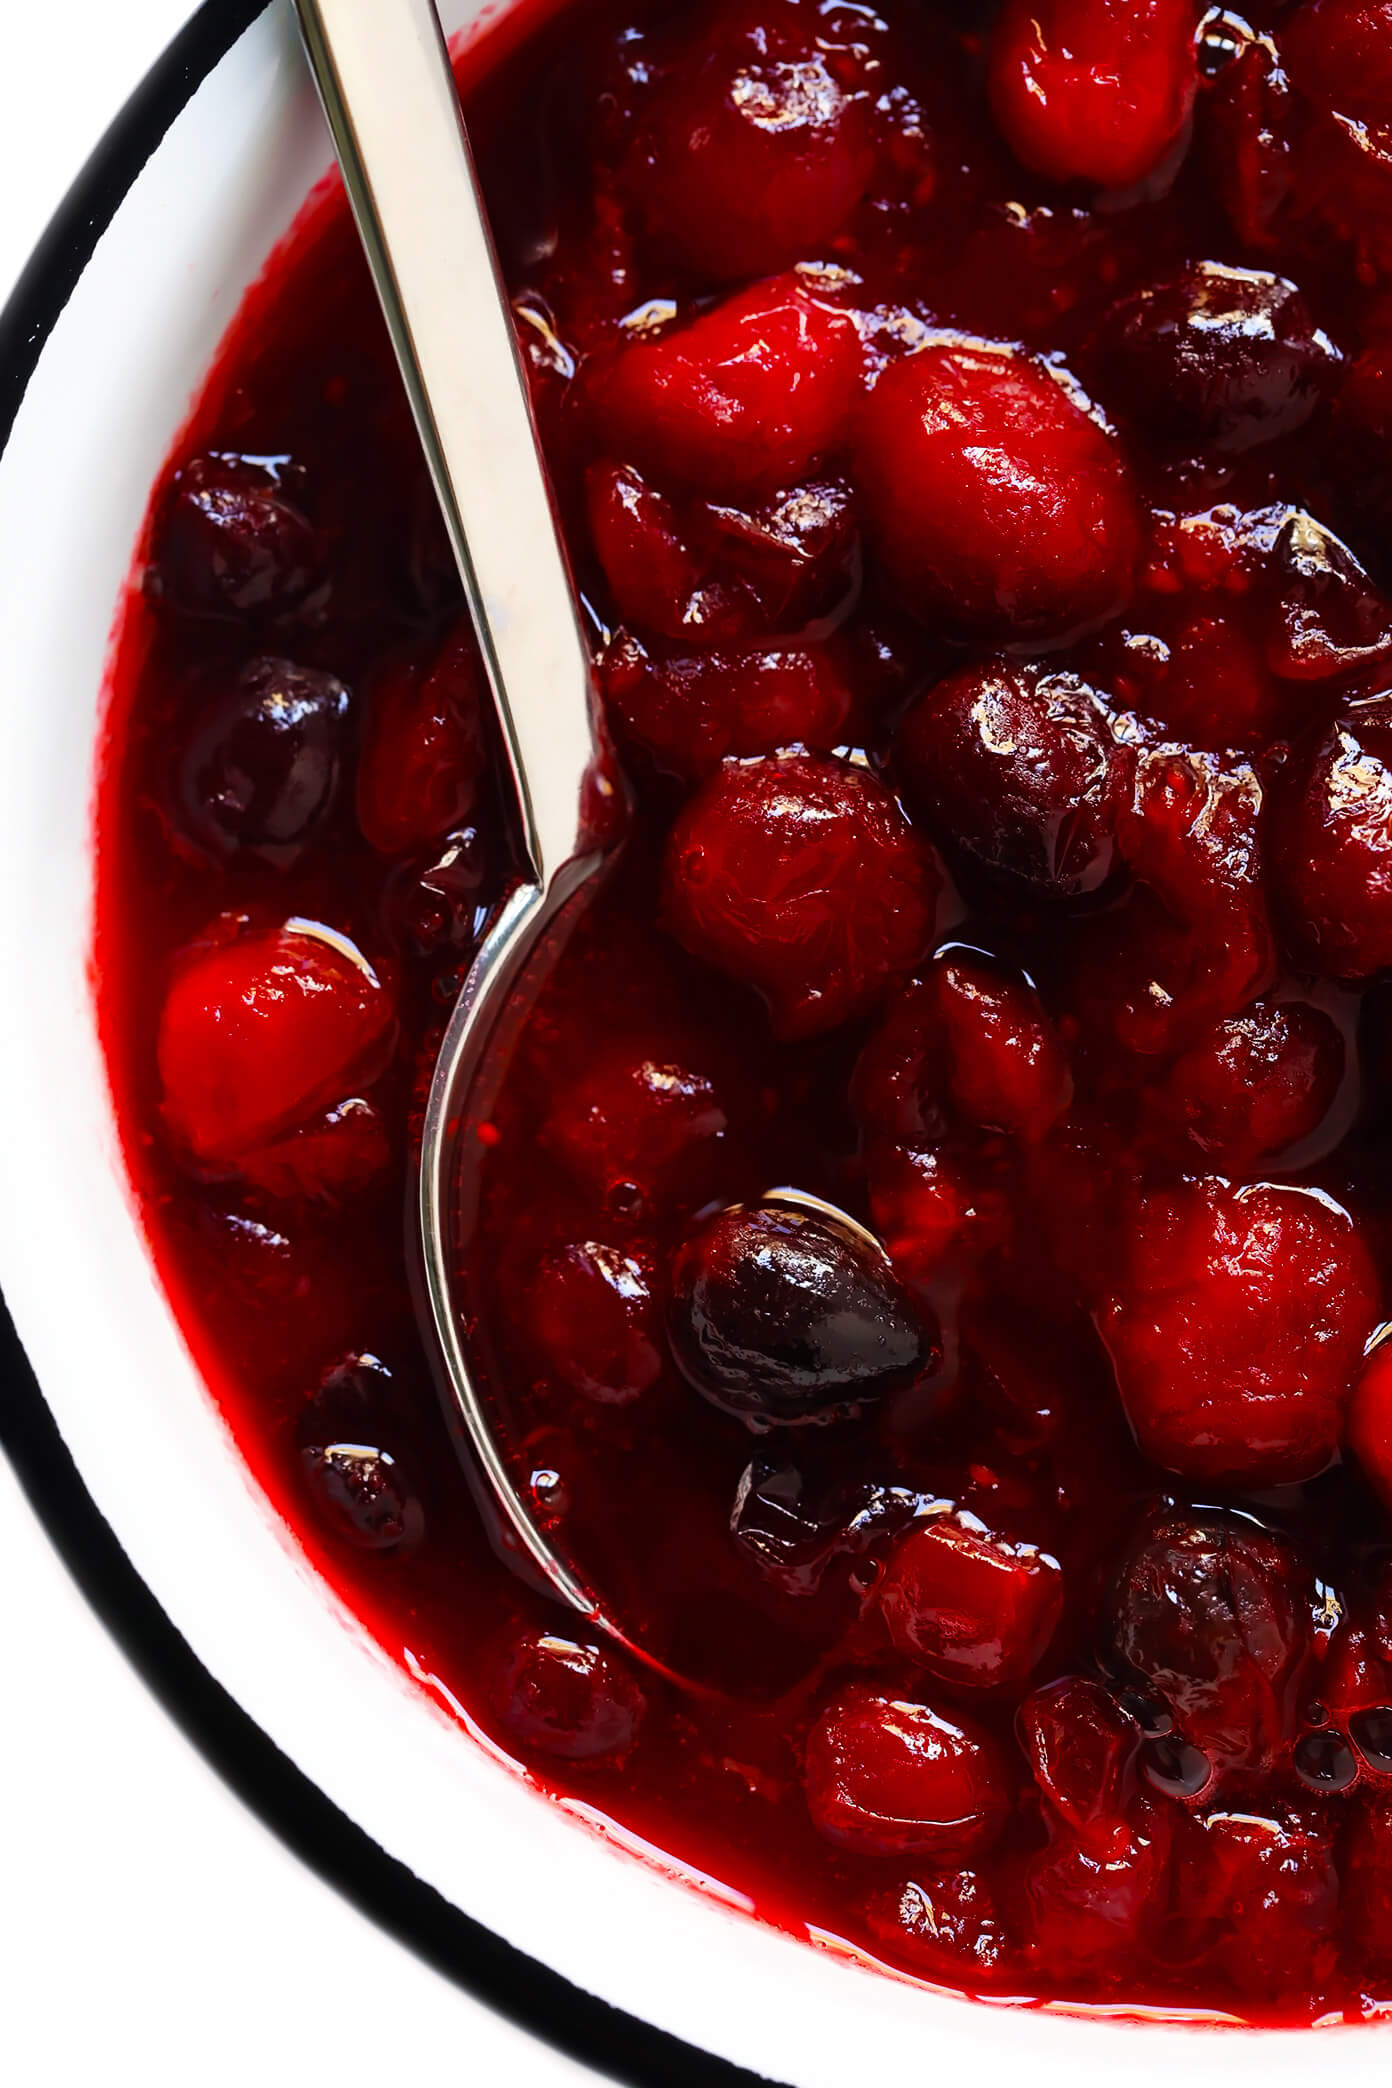 Homemade Cranberry Sauce in Bowl